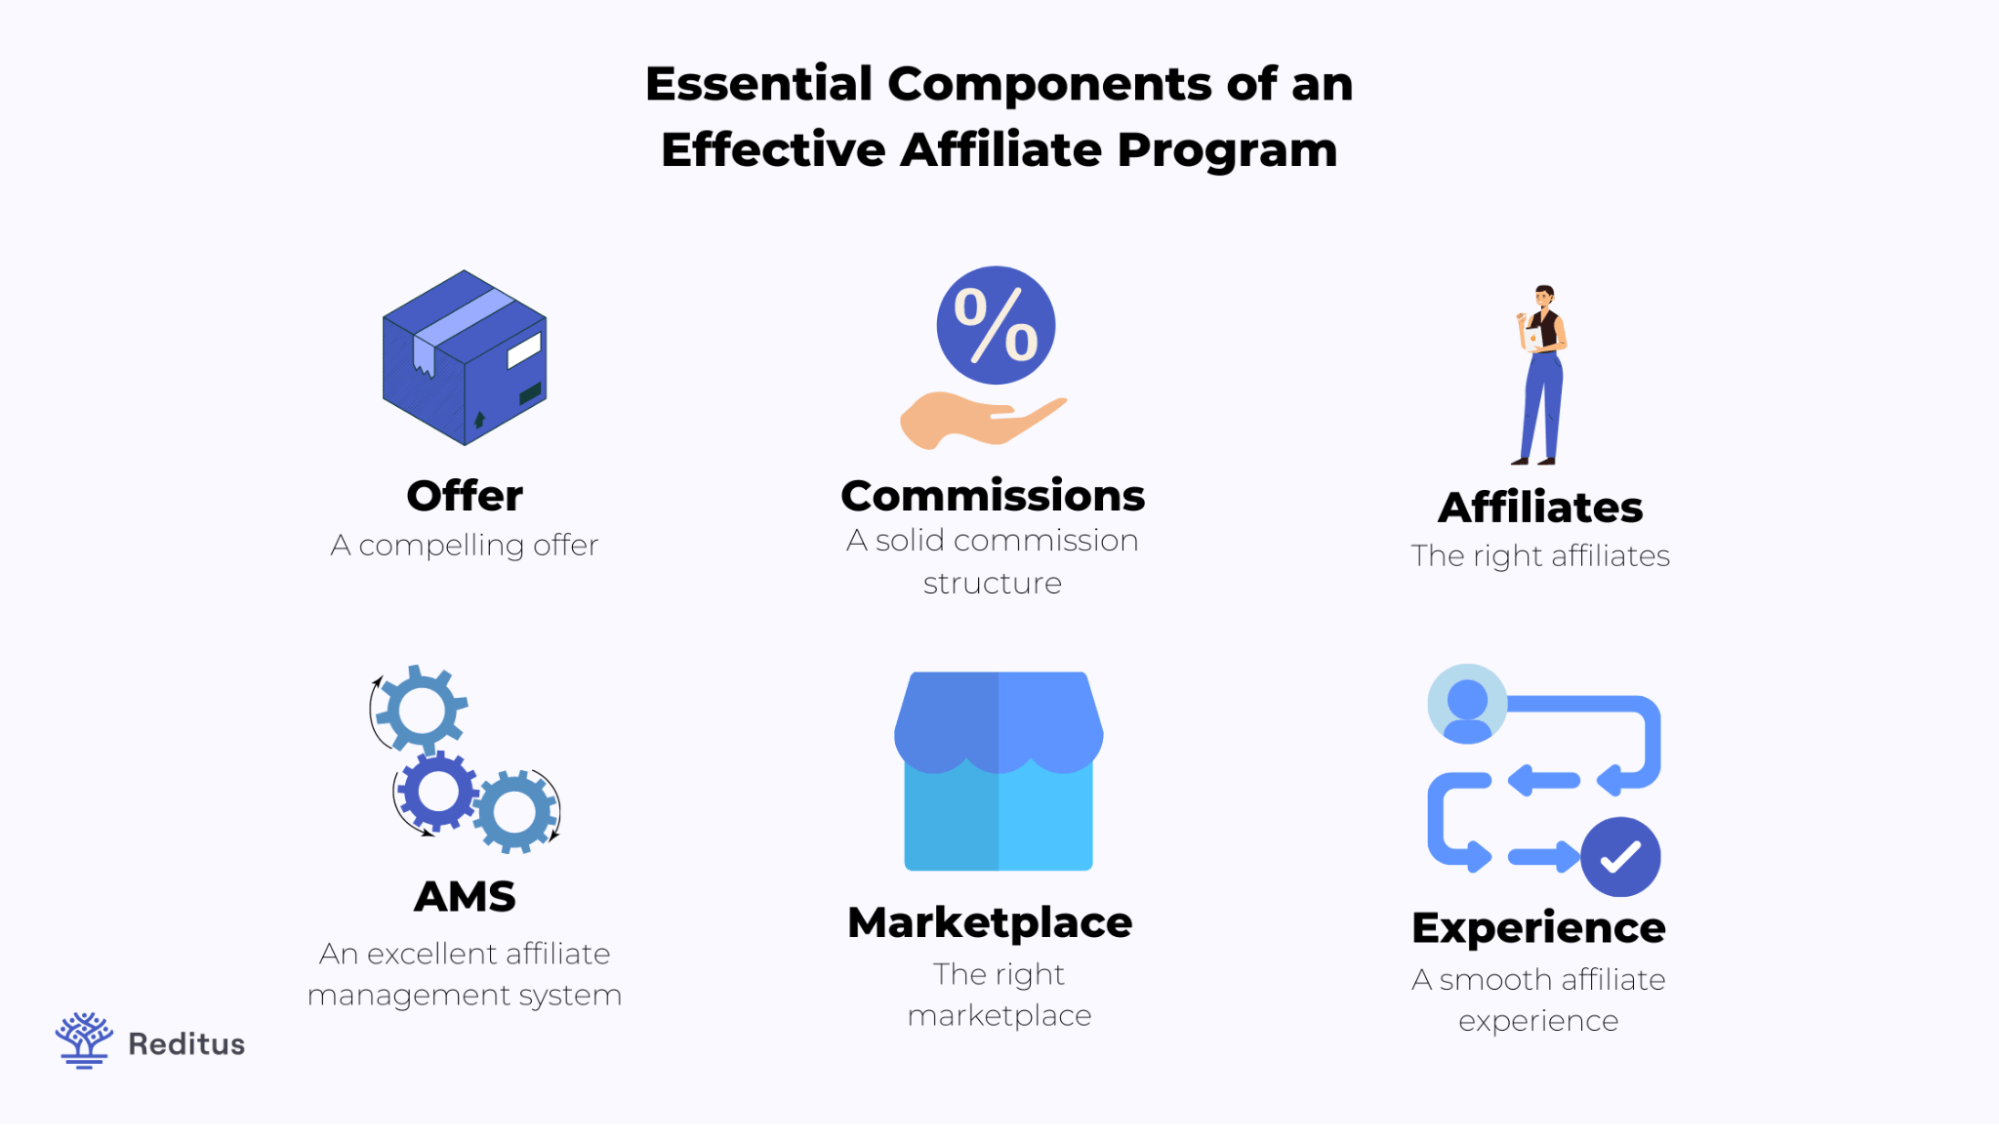 Illustration of the Essential Elements of an Effective Affiliate Program